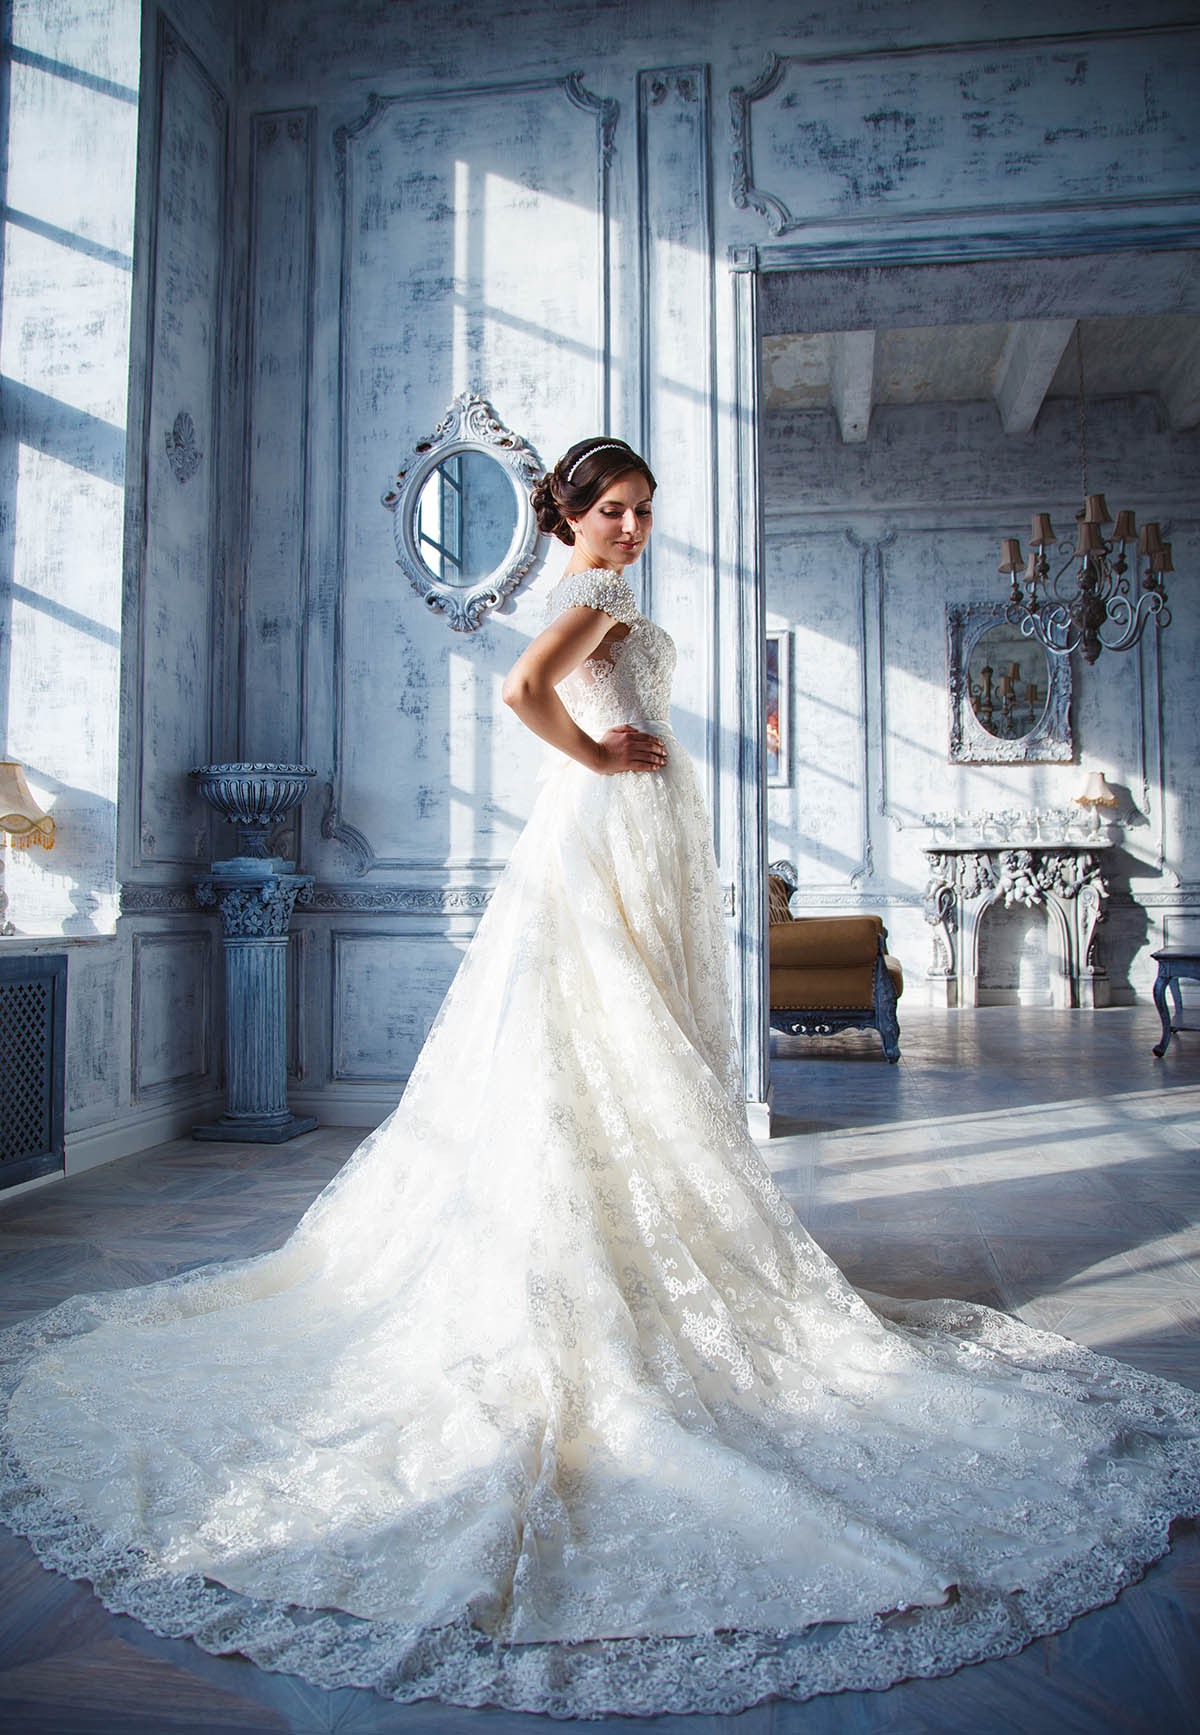 Finding Your Dream Wedding Dress: From A to Z - Love Your Dress